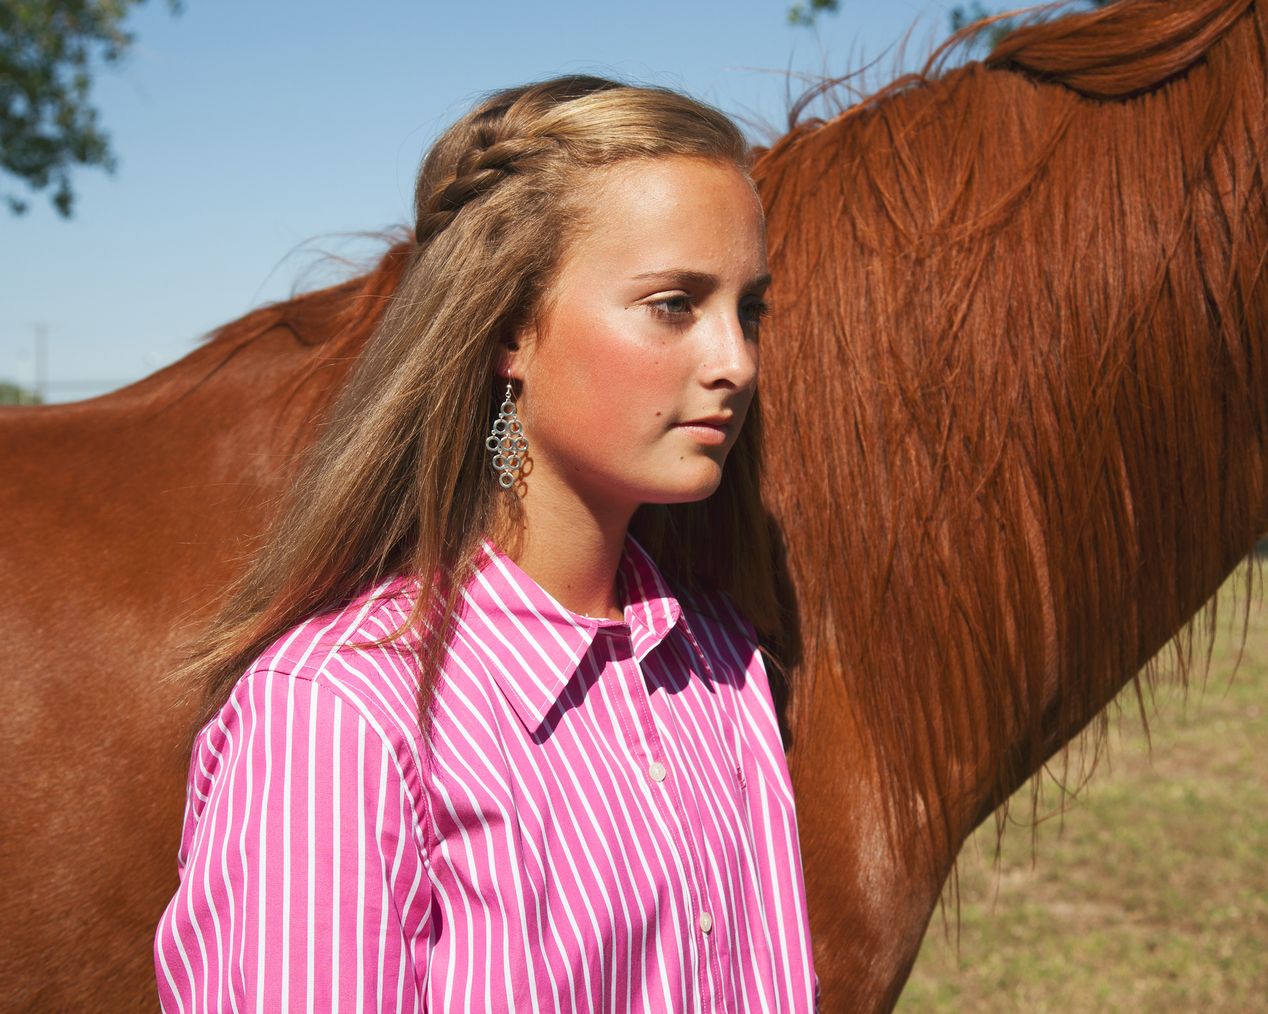 Teenage rodeo girl posing next to her brown horse, environmental portrait photography, Ilona Szwarc, contemporary Los Angeles artist.